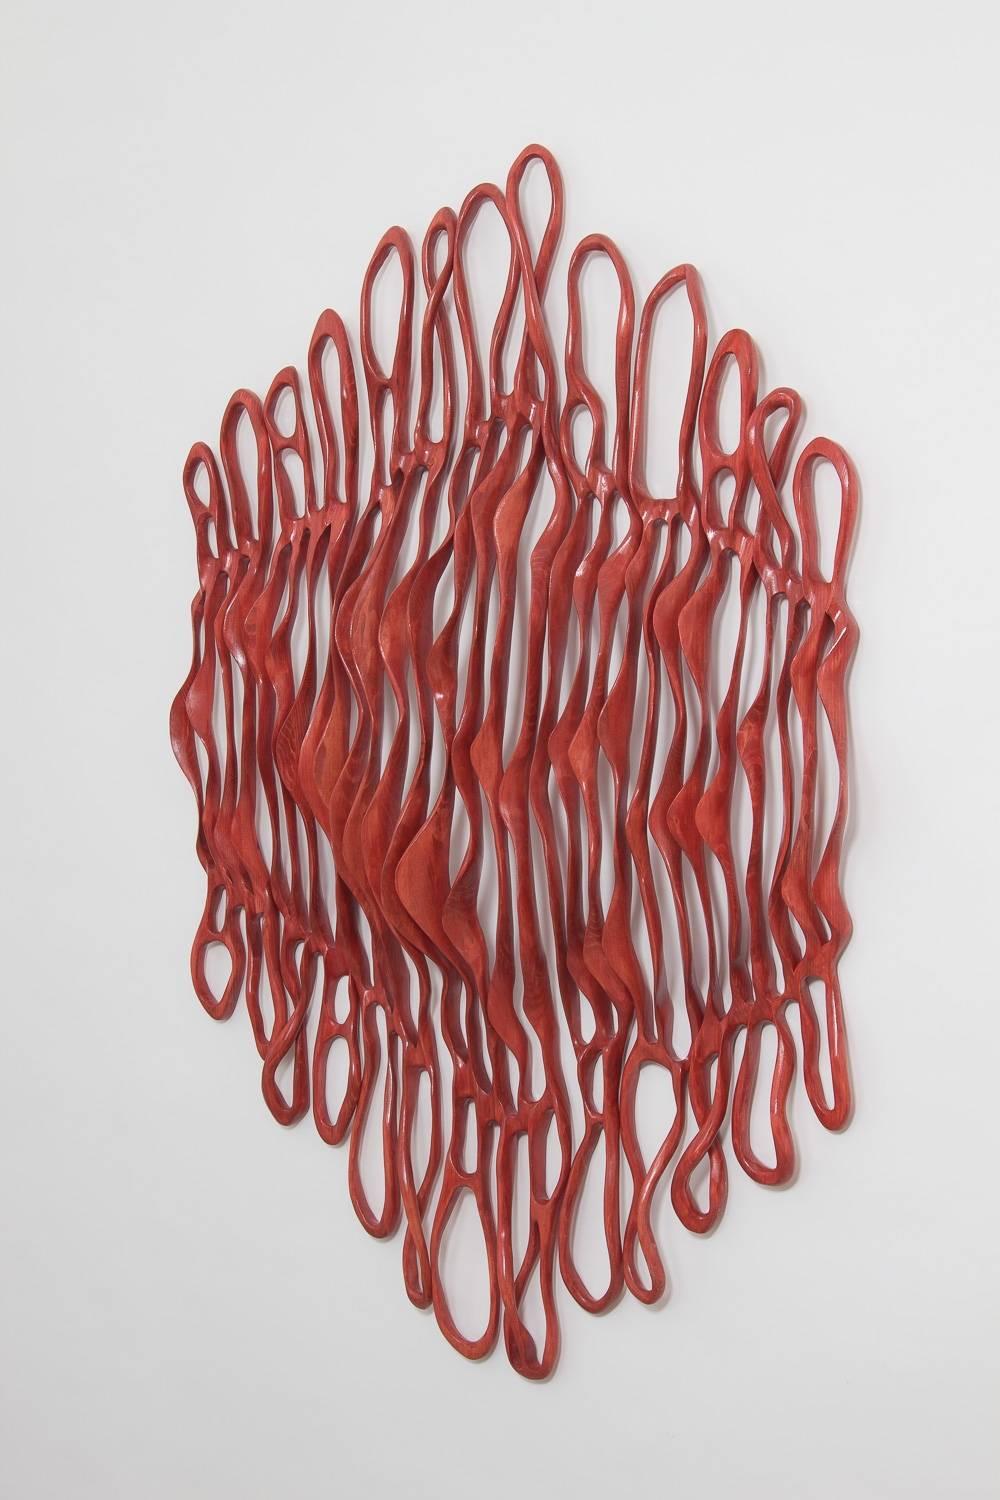 Caprice Pierucci received her BFA from Carnegie-Mellon University and her MFA from the School of Visual Arts in New York City. She is best known for her wood wall relief works that evoke ideas of skeletons, shells and landscapes. They are inspired